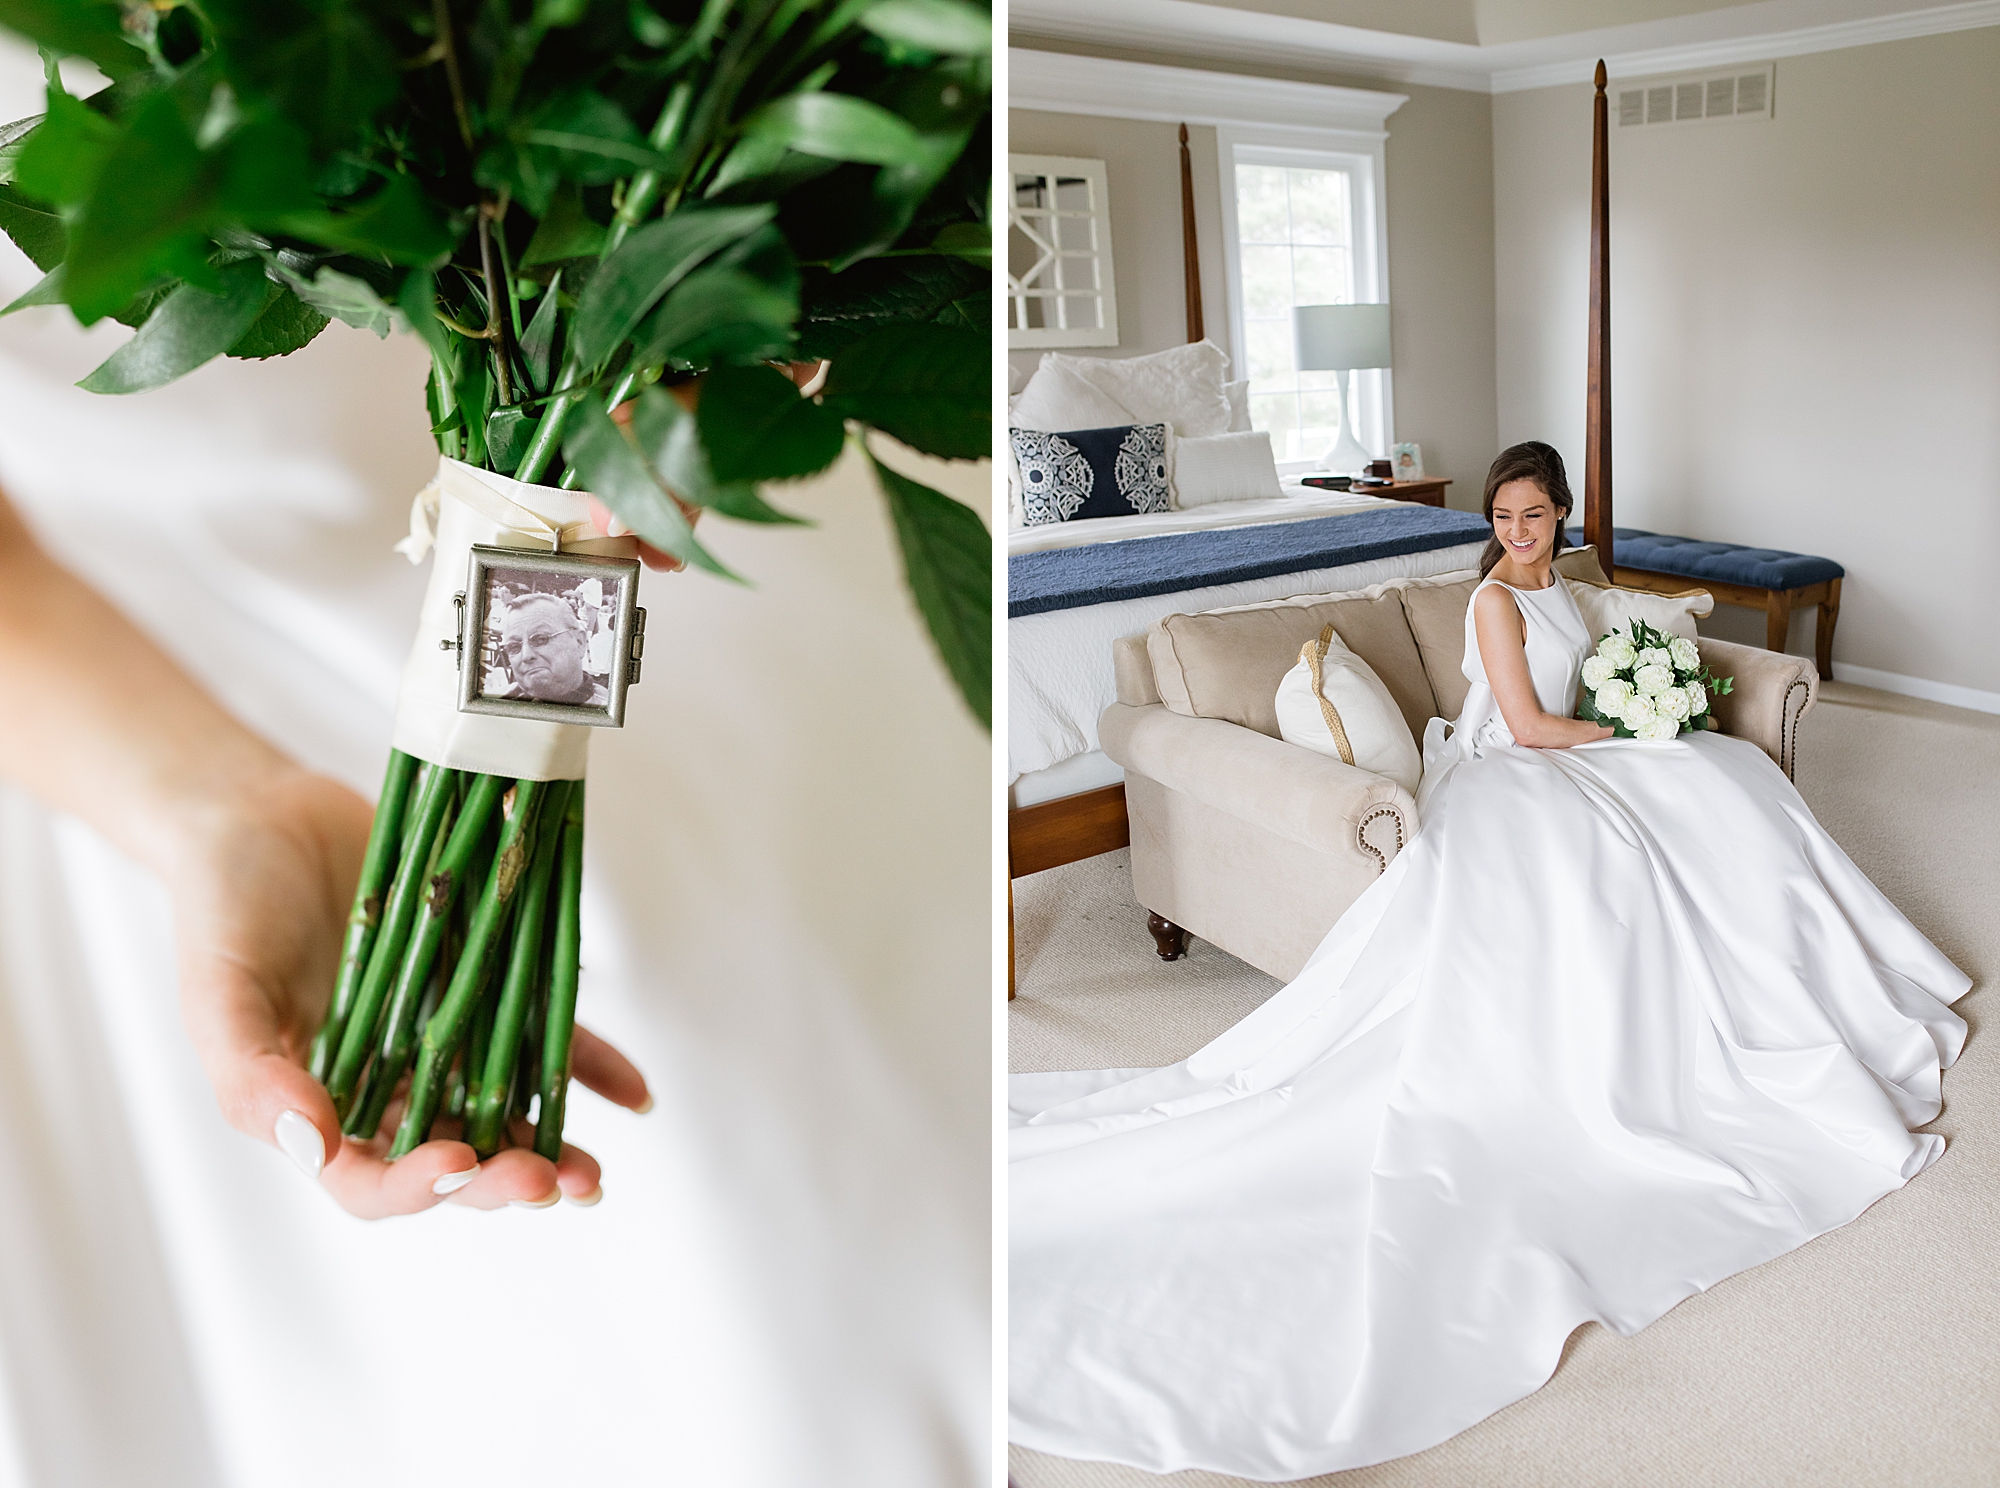 A springtime tented wedding at The Inn at St. John's in metro Detroit by Michigan wedding photographer Breanne Rochelle Photography.